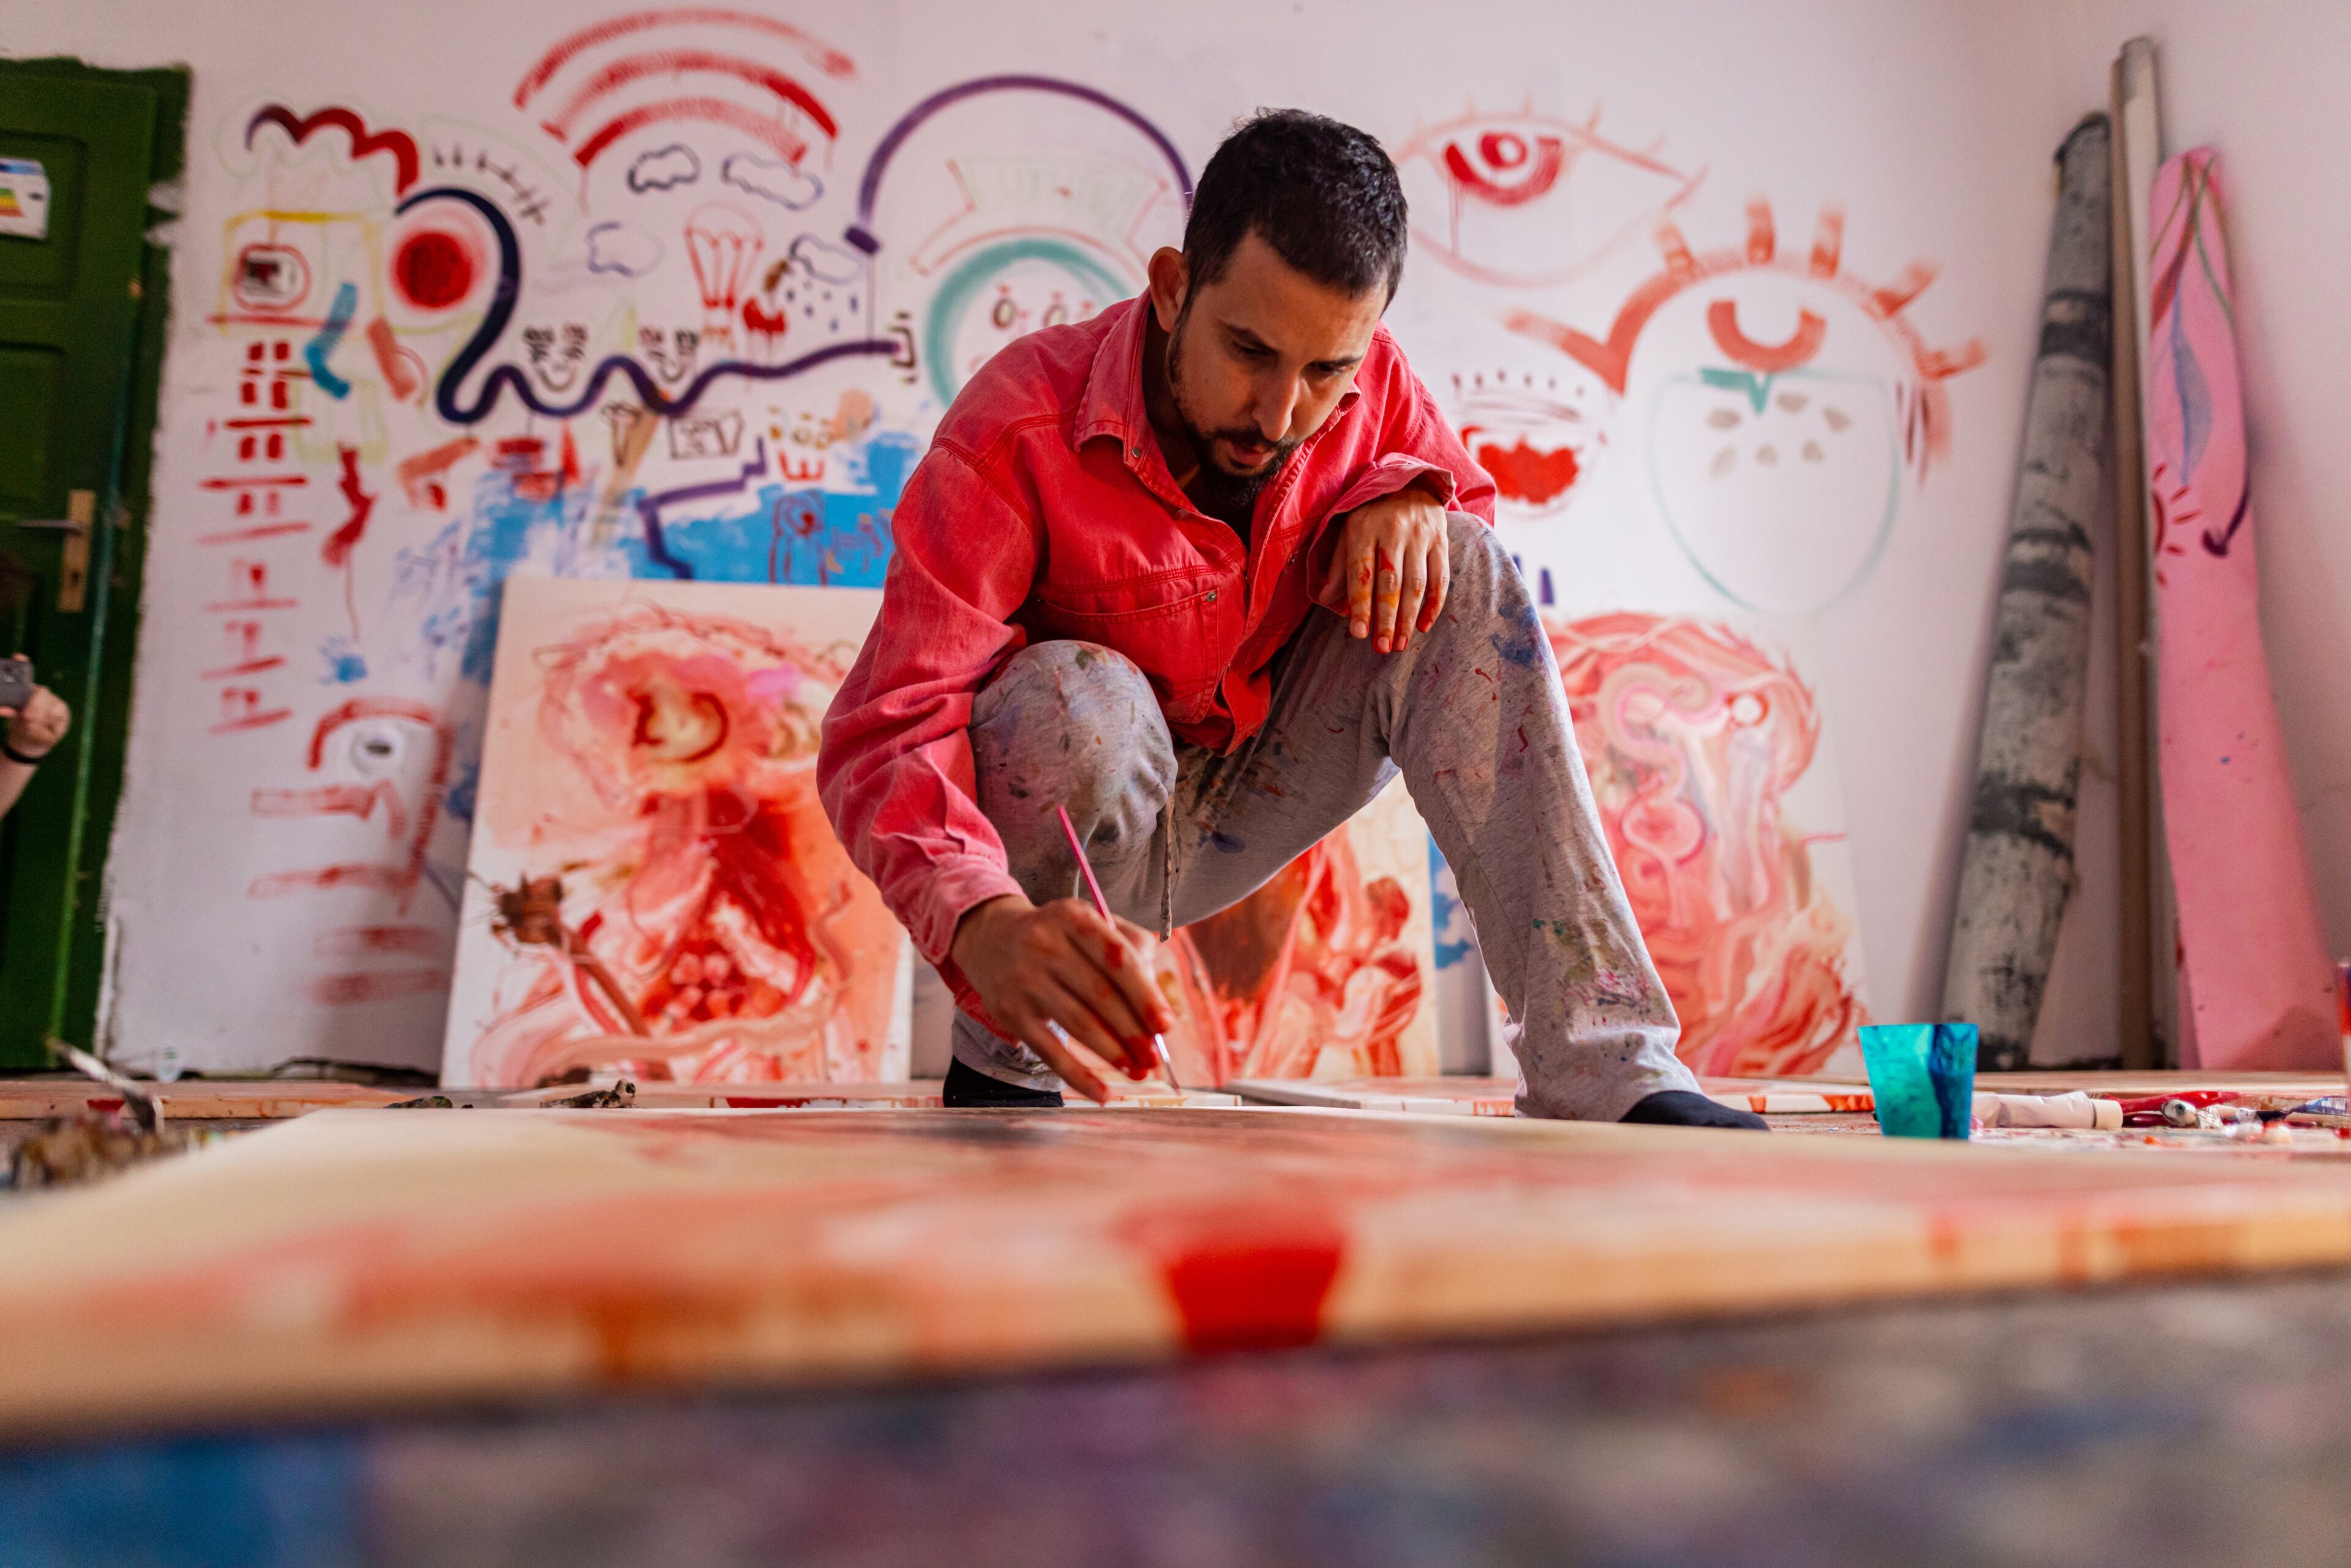 An artist in a red shirt is intently painting on canvas, surrounded by colorful abstract art and a wall filled with whimsical doodles.